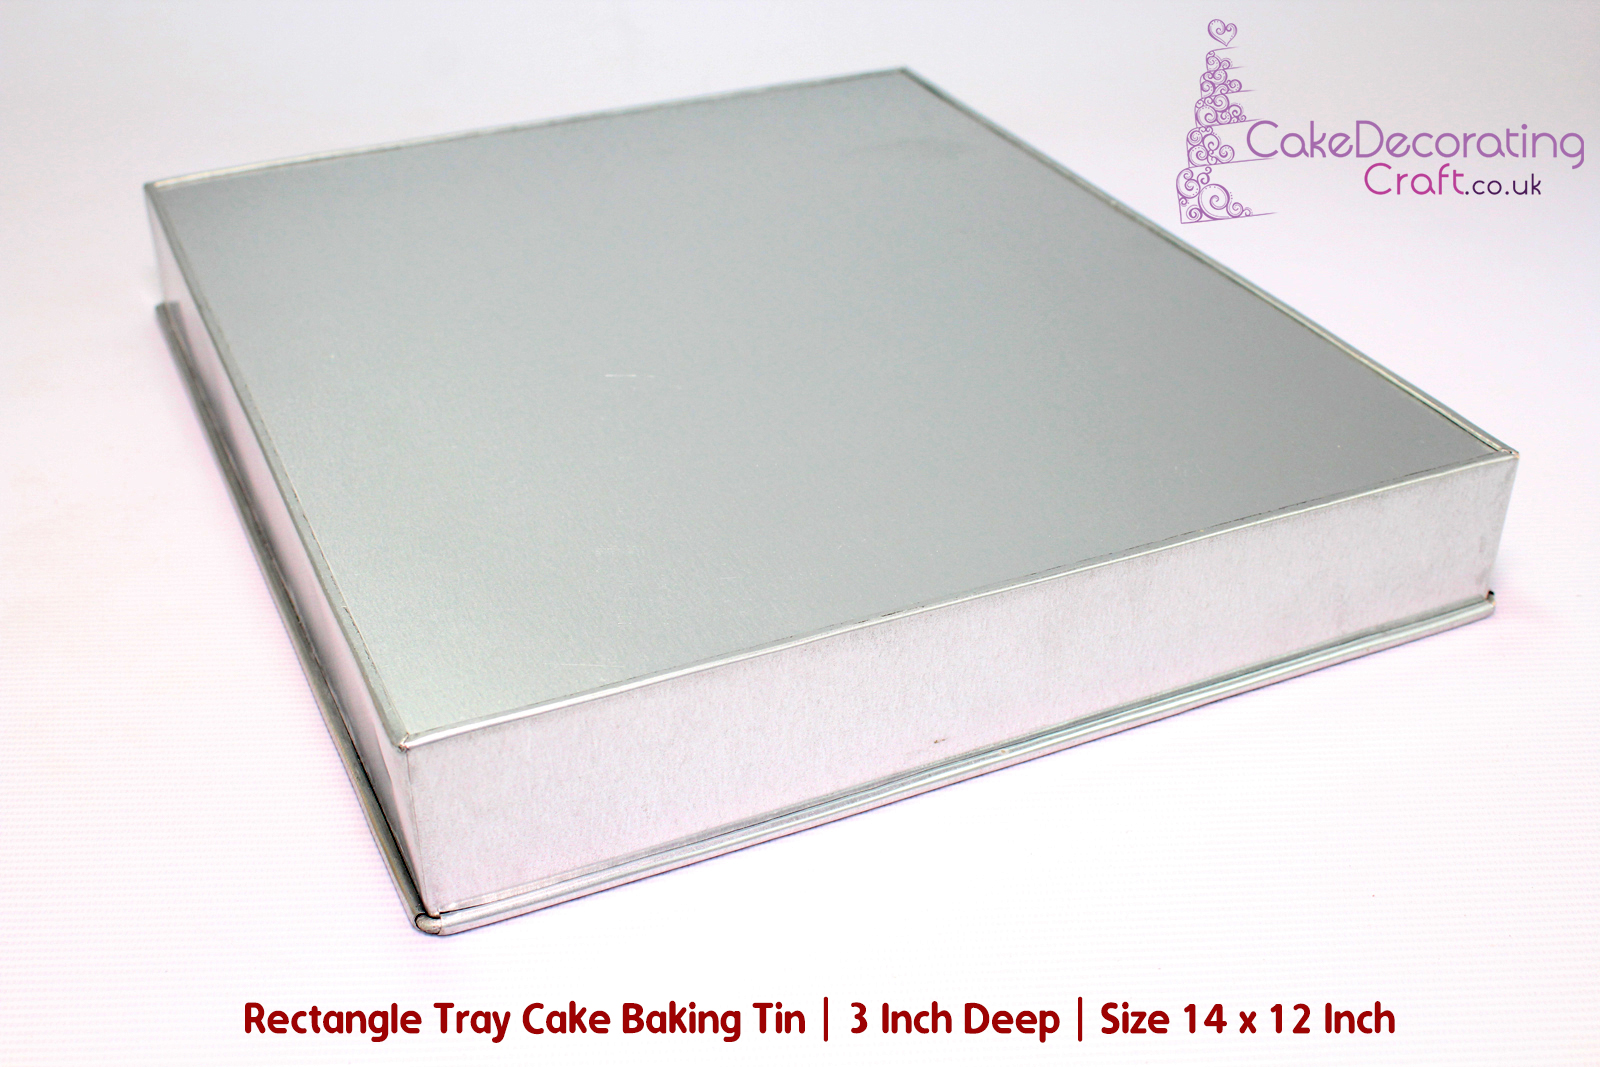 Rectangle Oblong Tray | Size 14 x 12  Inch | 3 Inch Deep | Cake Baking Tins